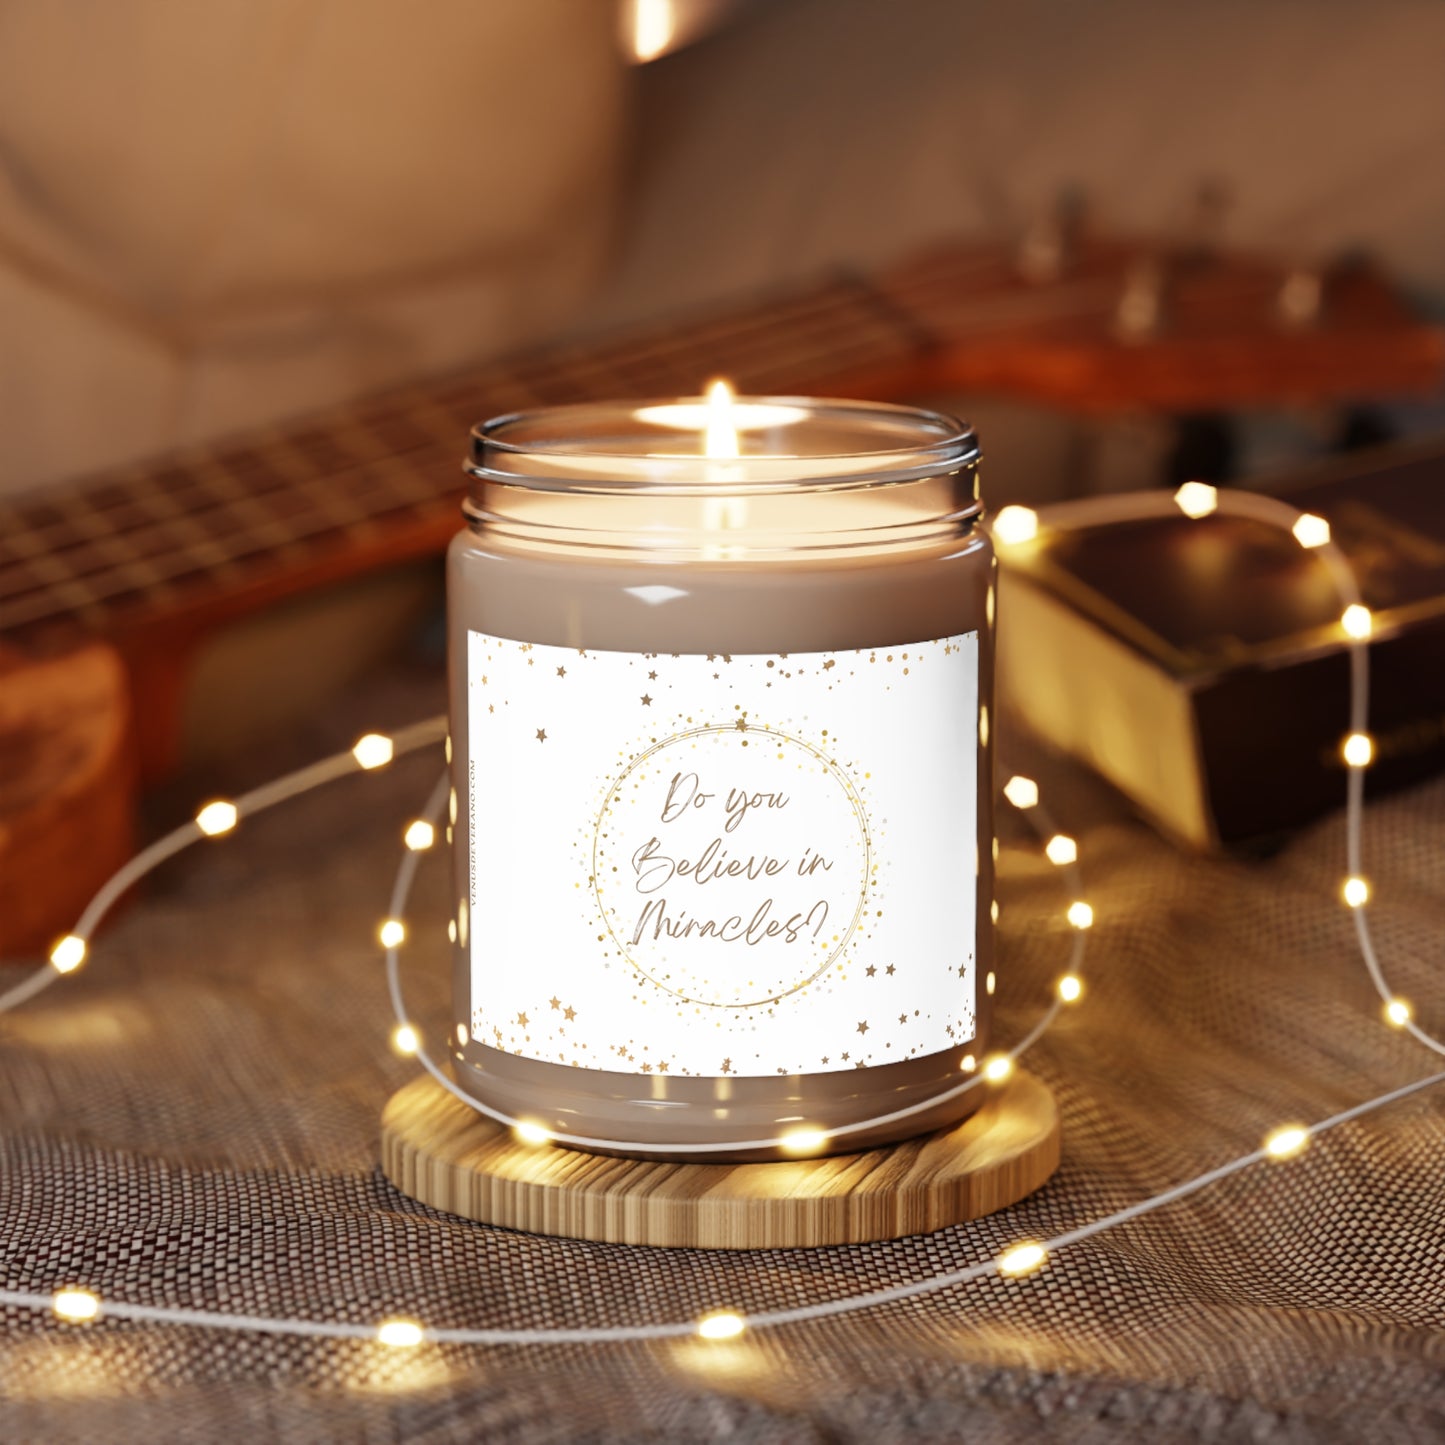 Scented Candles, 9oz - BELIEVE in miracles - Made 100% natural soy wax blend and cotton wick - Vanilla Bean, Comfort Spice and Sea Breeze fragrances available.